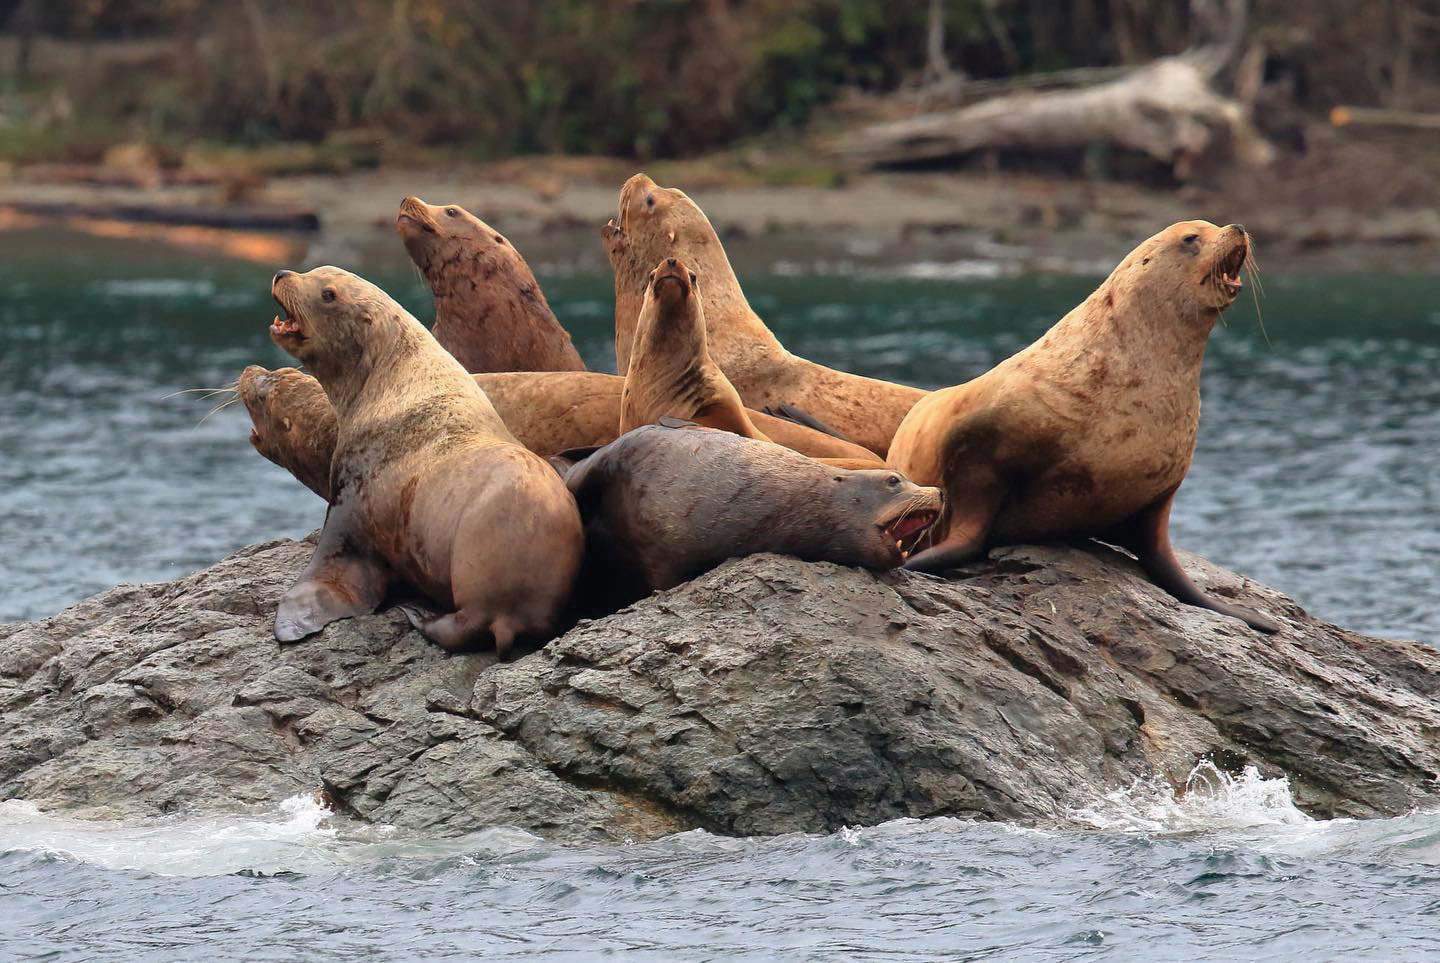 "Seals sitting on a rock in the Puget Sound"